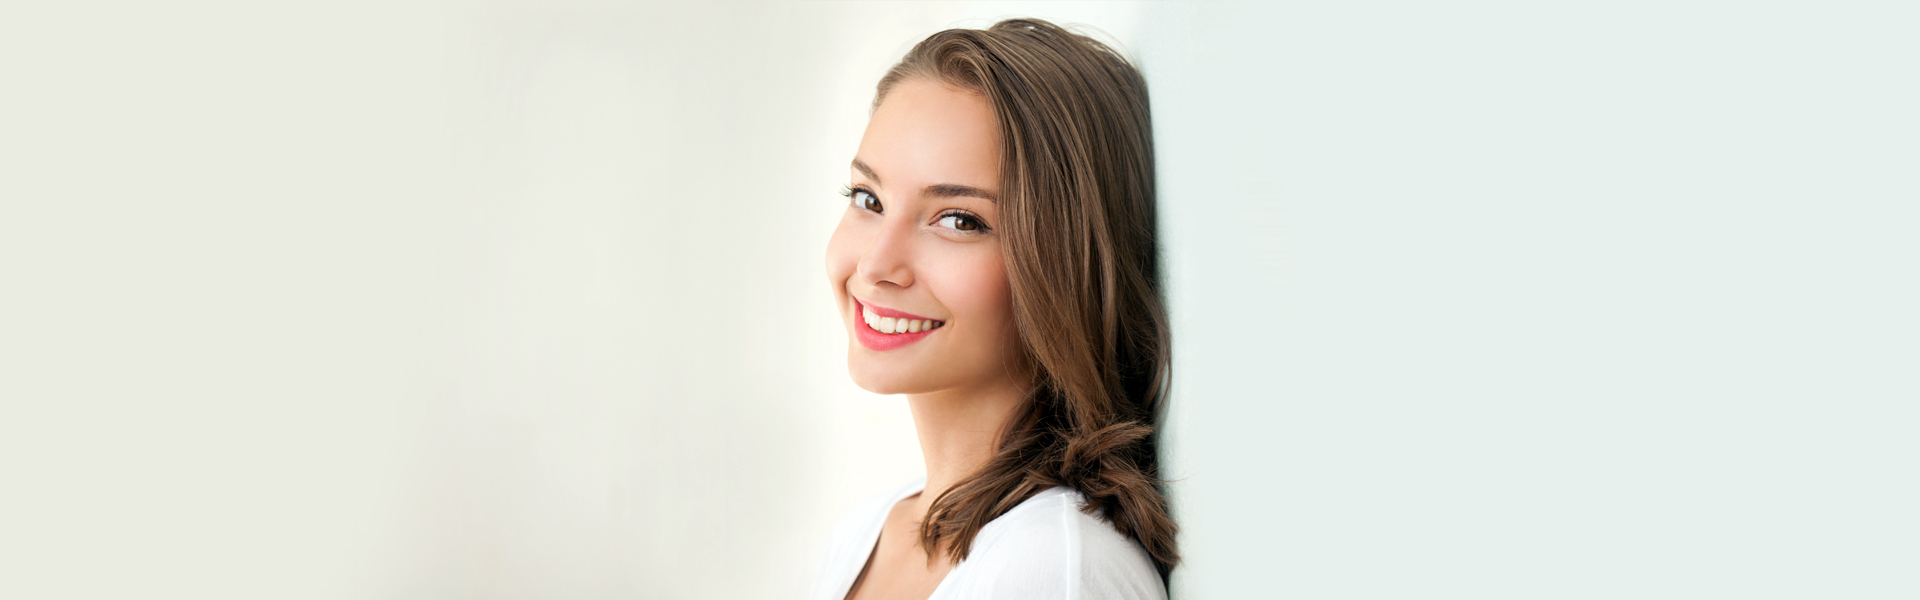 7 Important Facts about Smile Makeovers